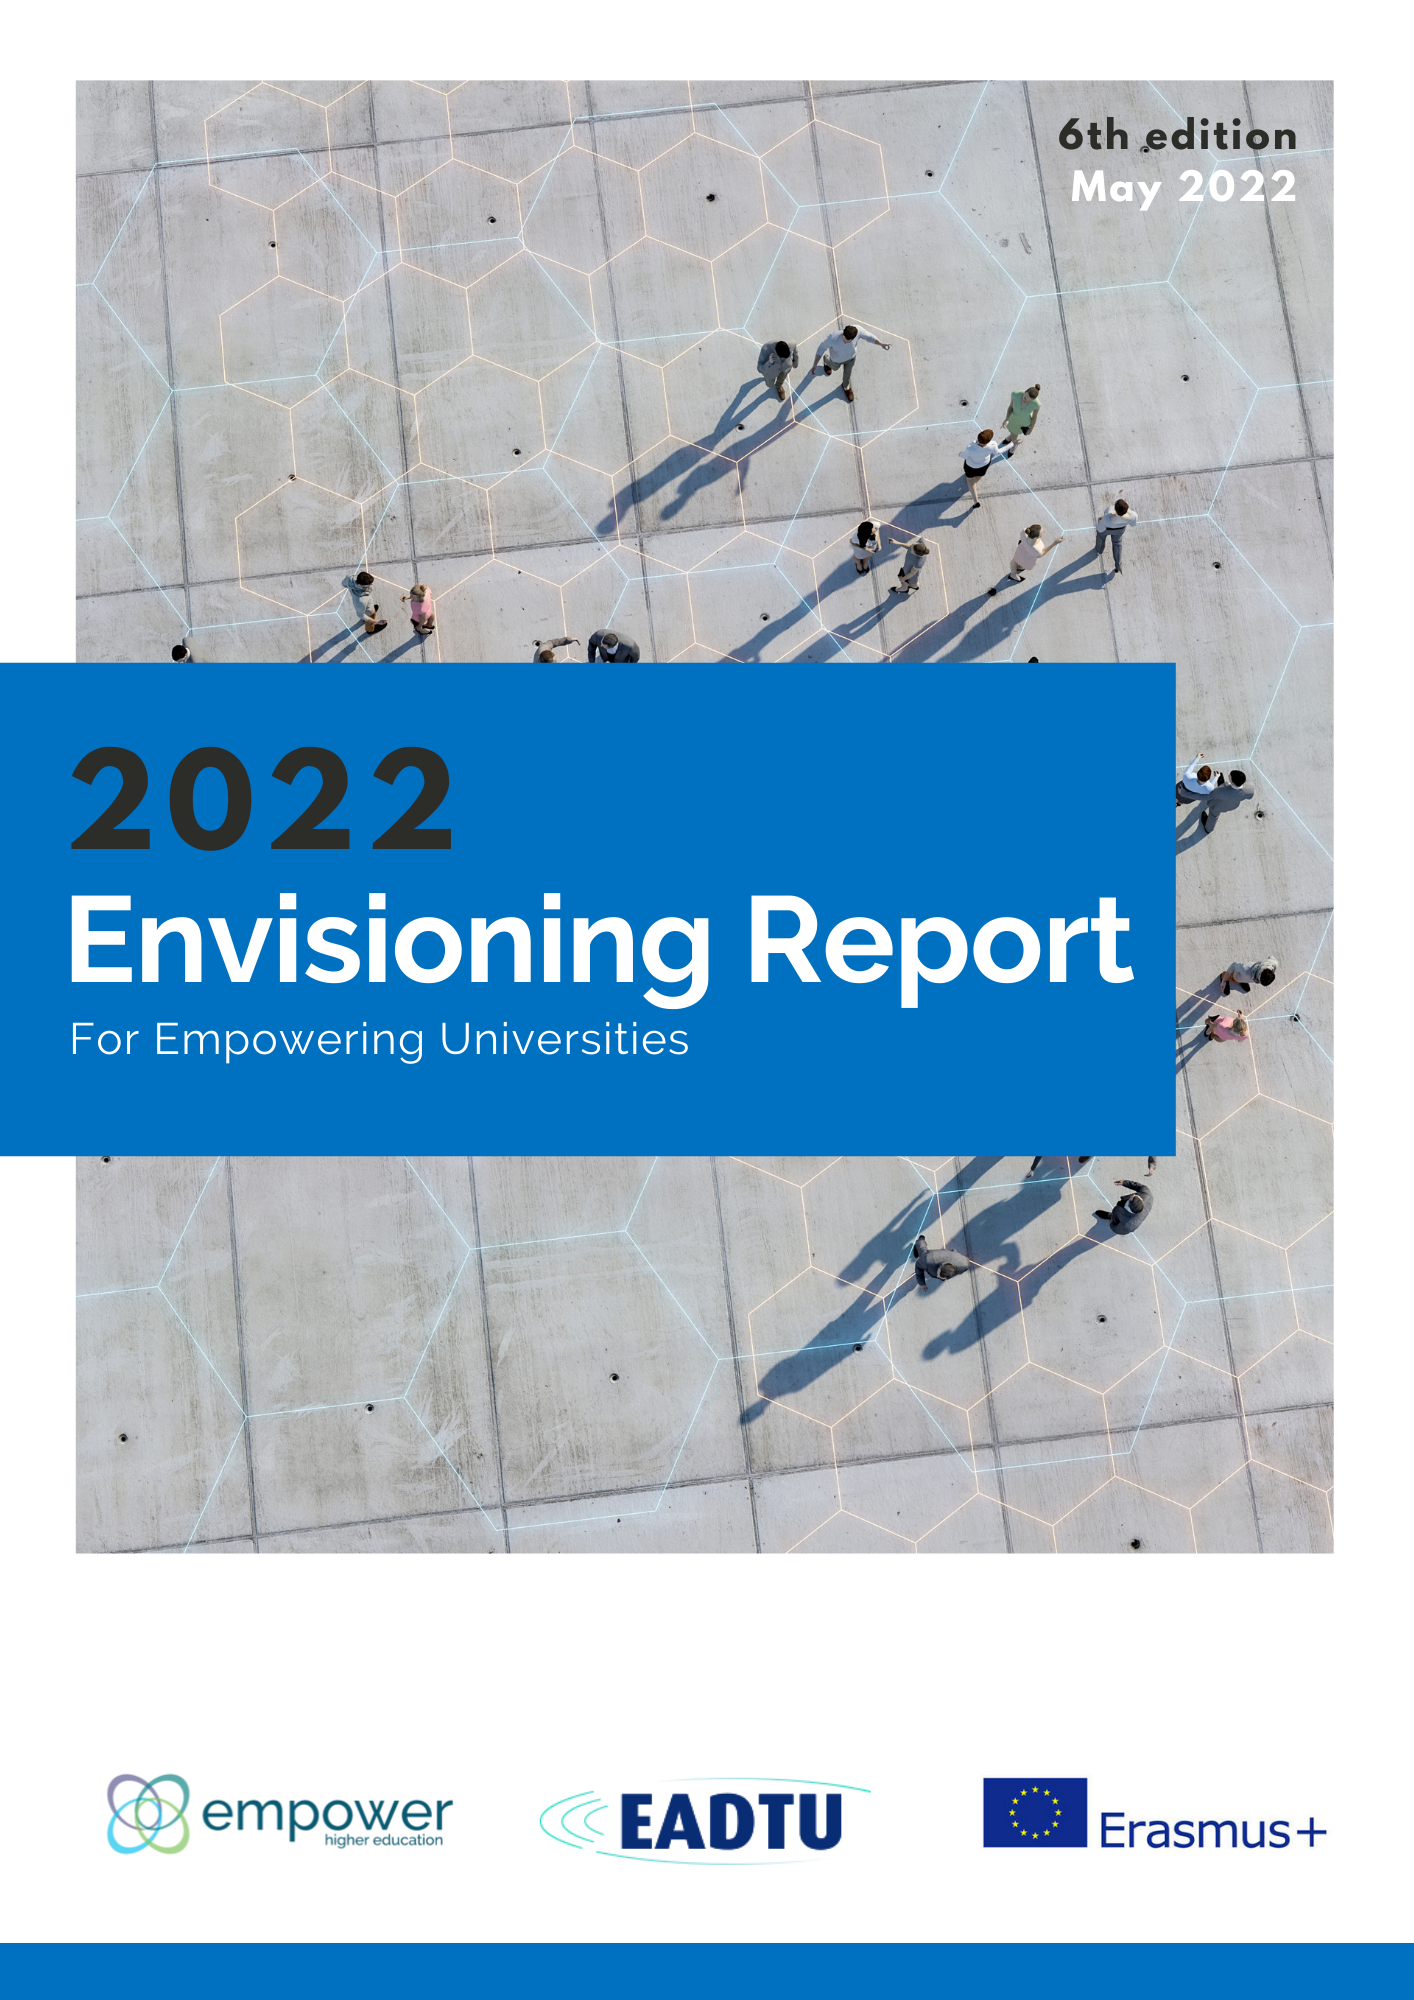 The Envisioning Report